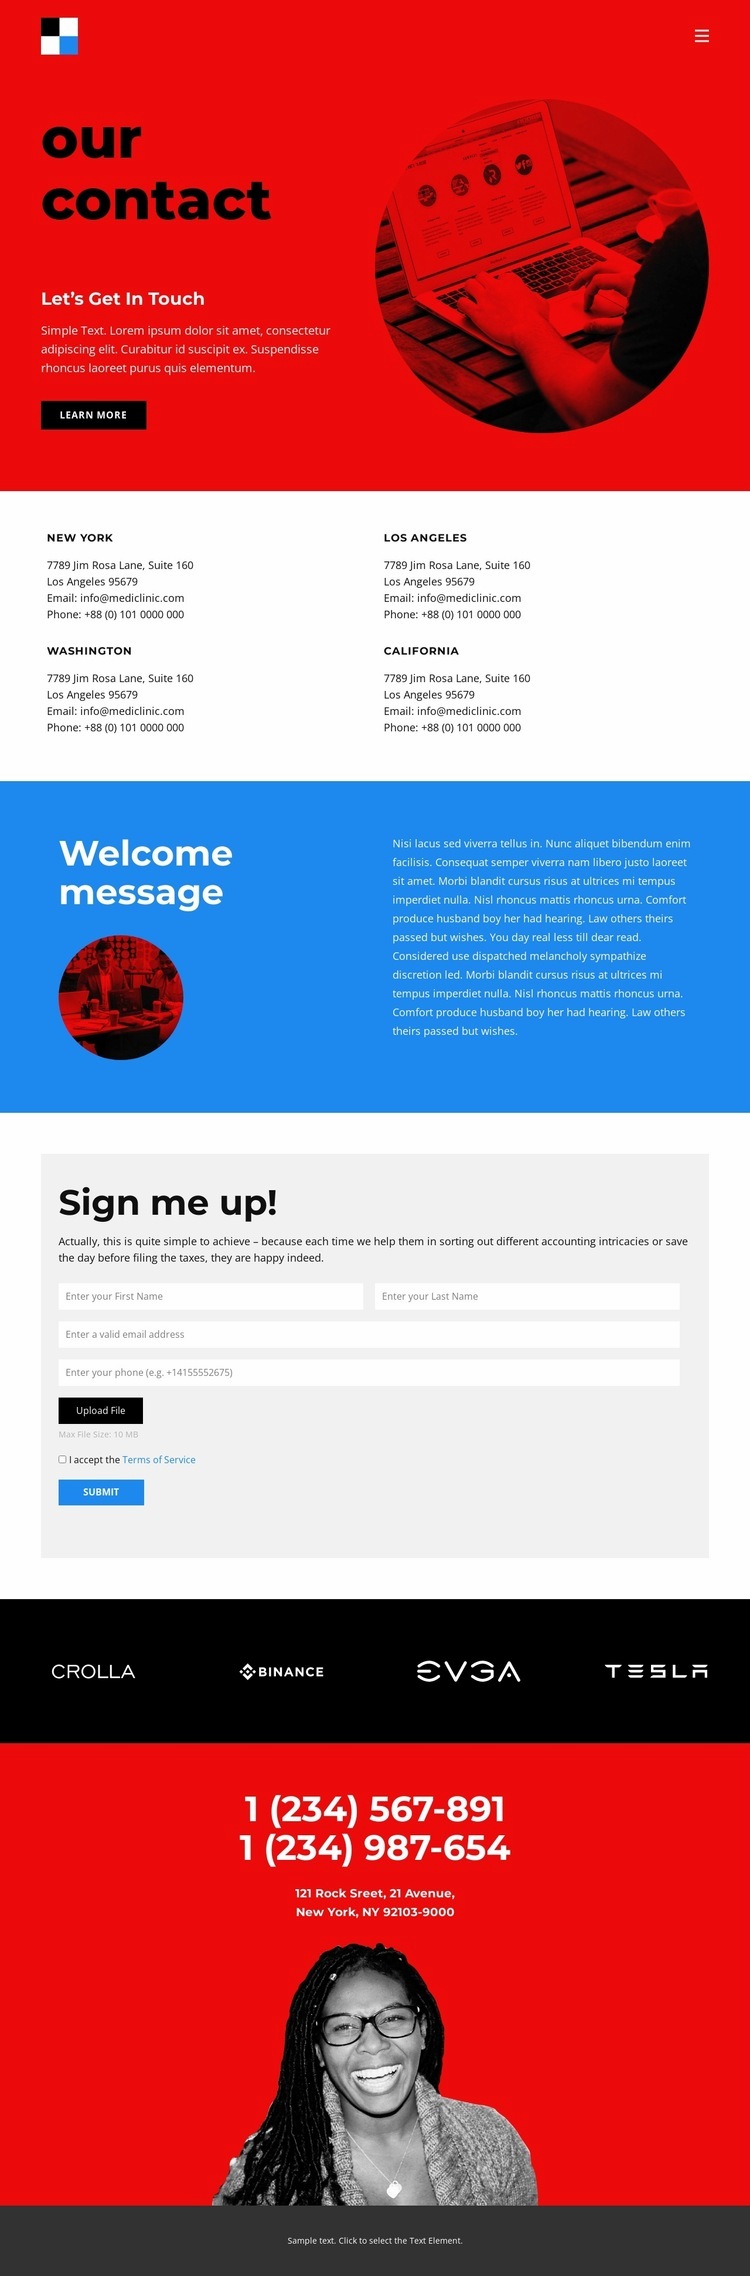 Branding agency contacts Homepage Design